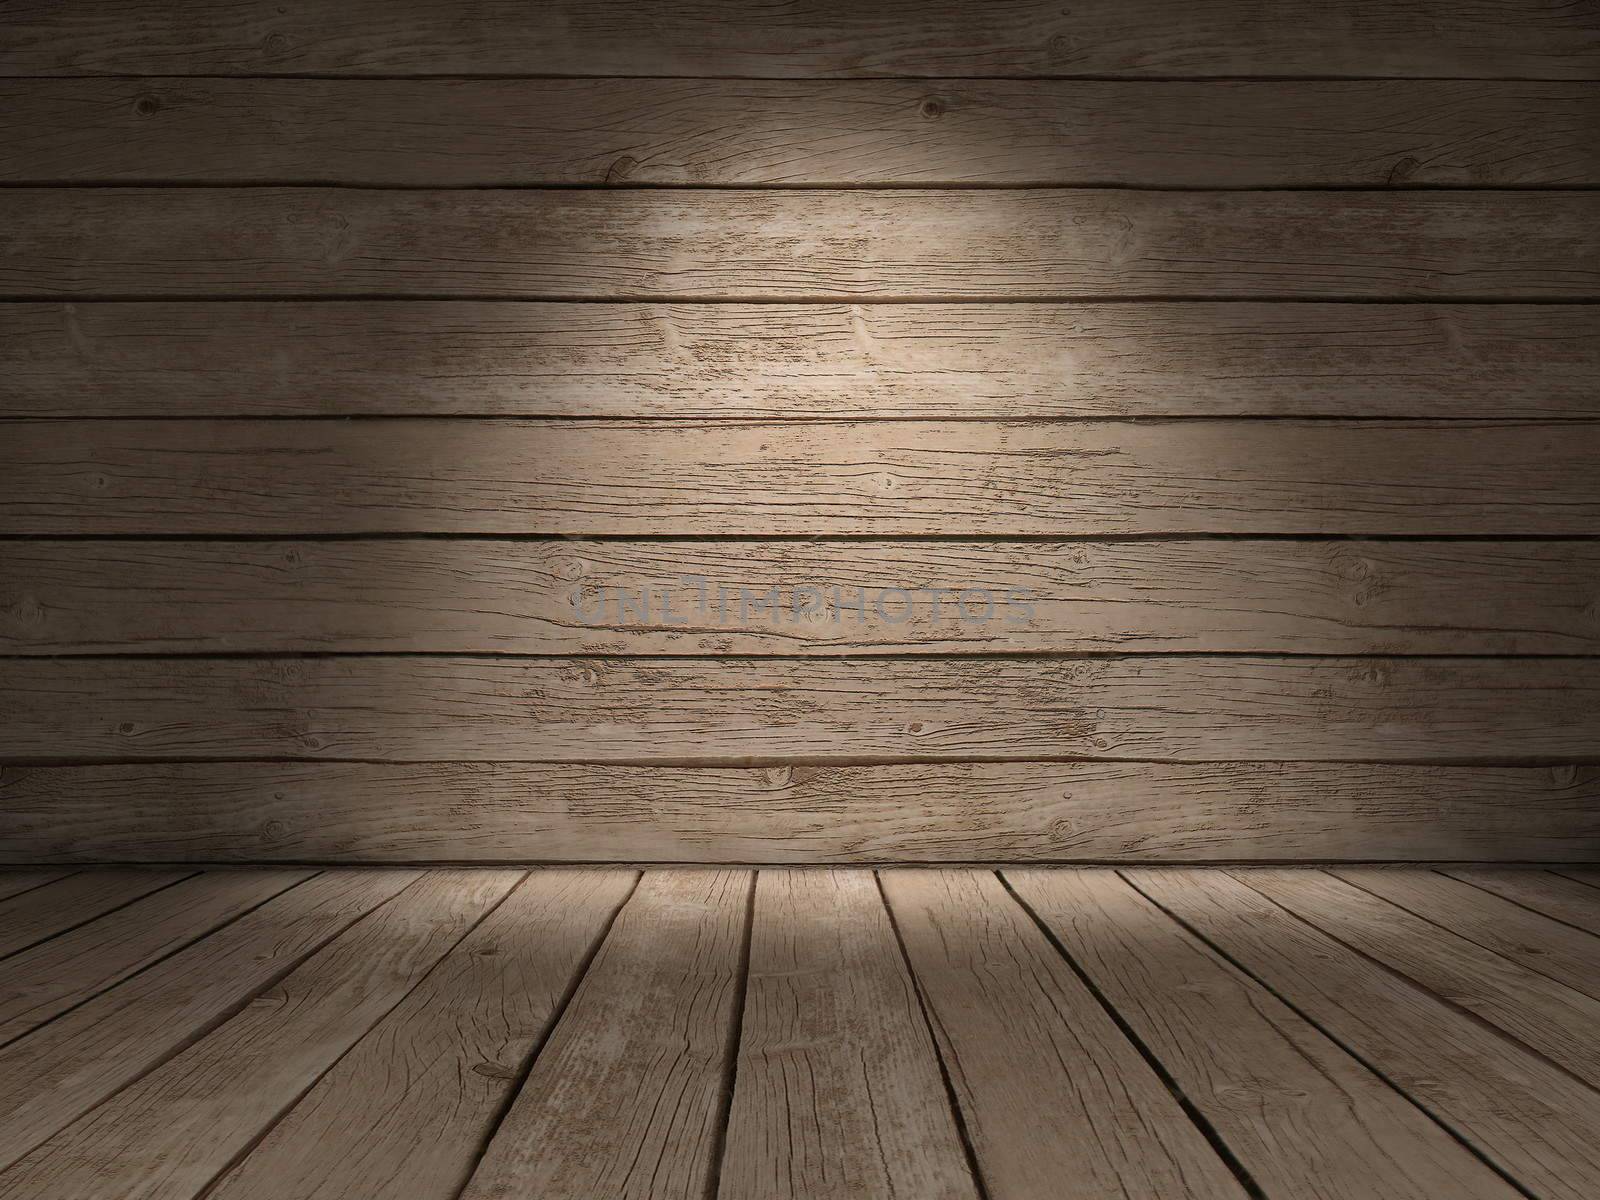 Wood wall and floor by dynamicfoto